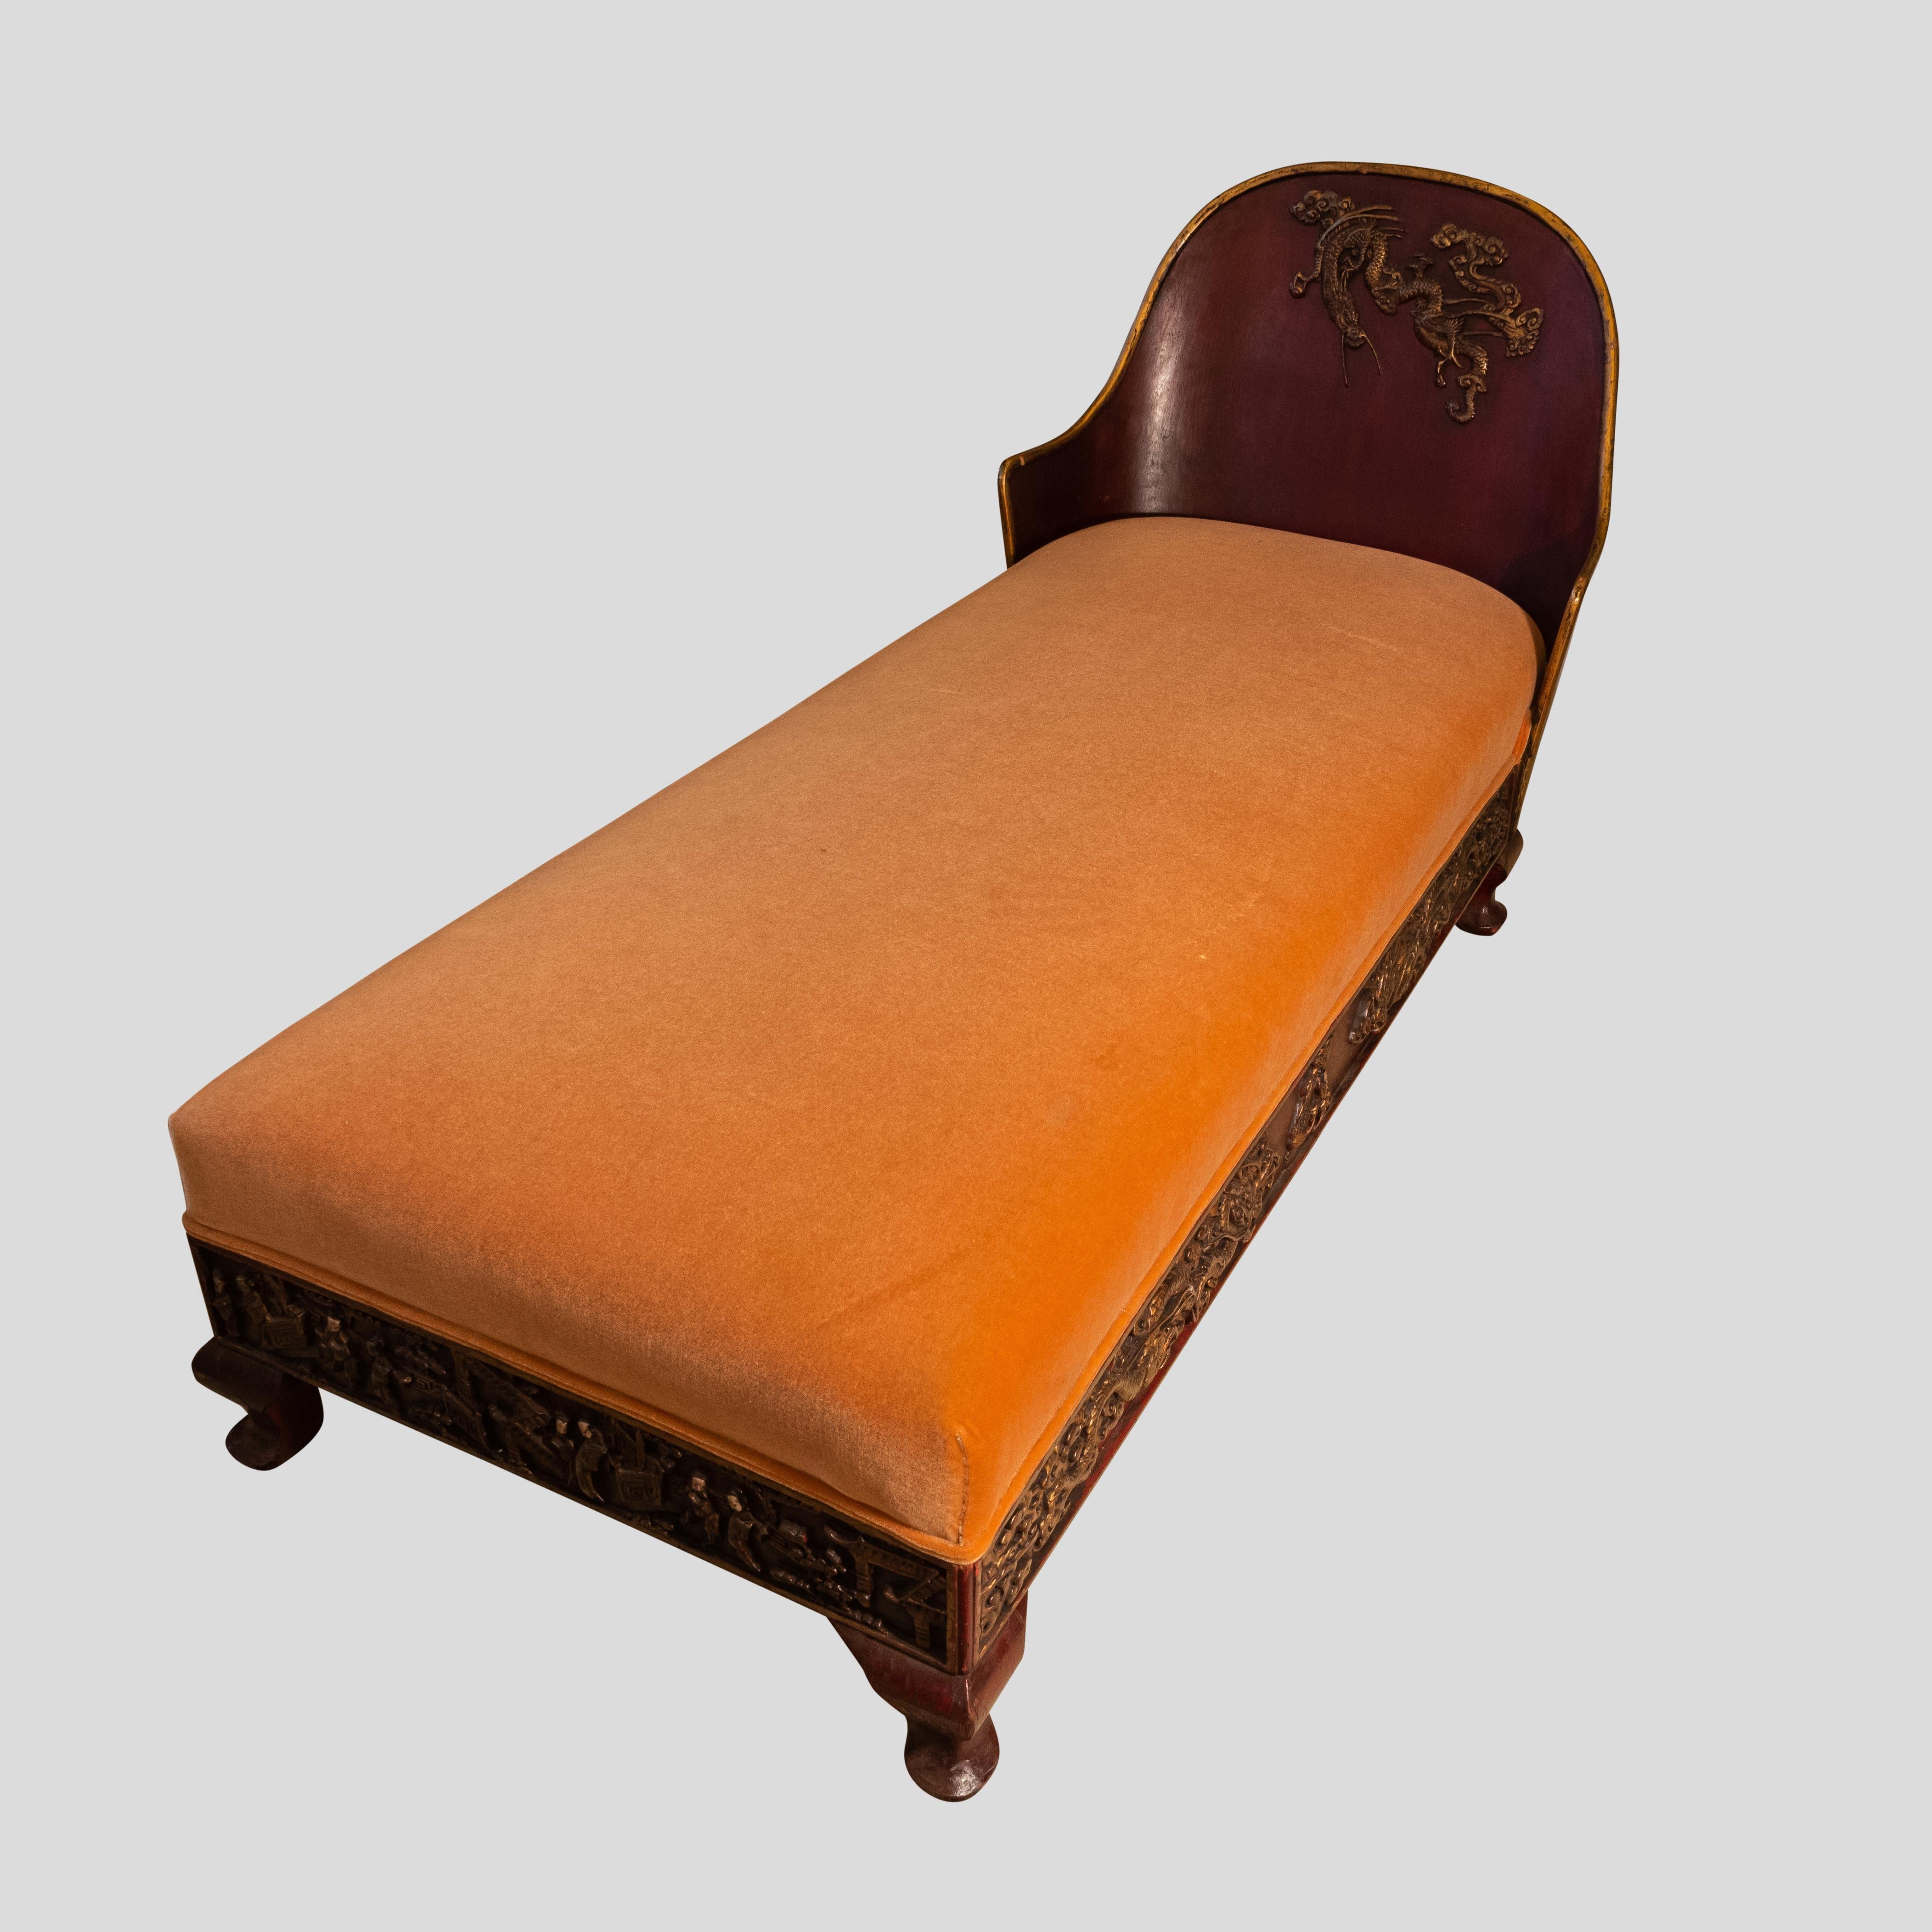 Early 20th Century 1920s Chinoiserie Daybed French Original Dark Red Lacquer Gilt on Carved Wood